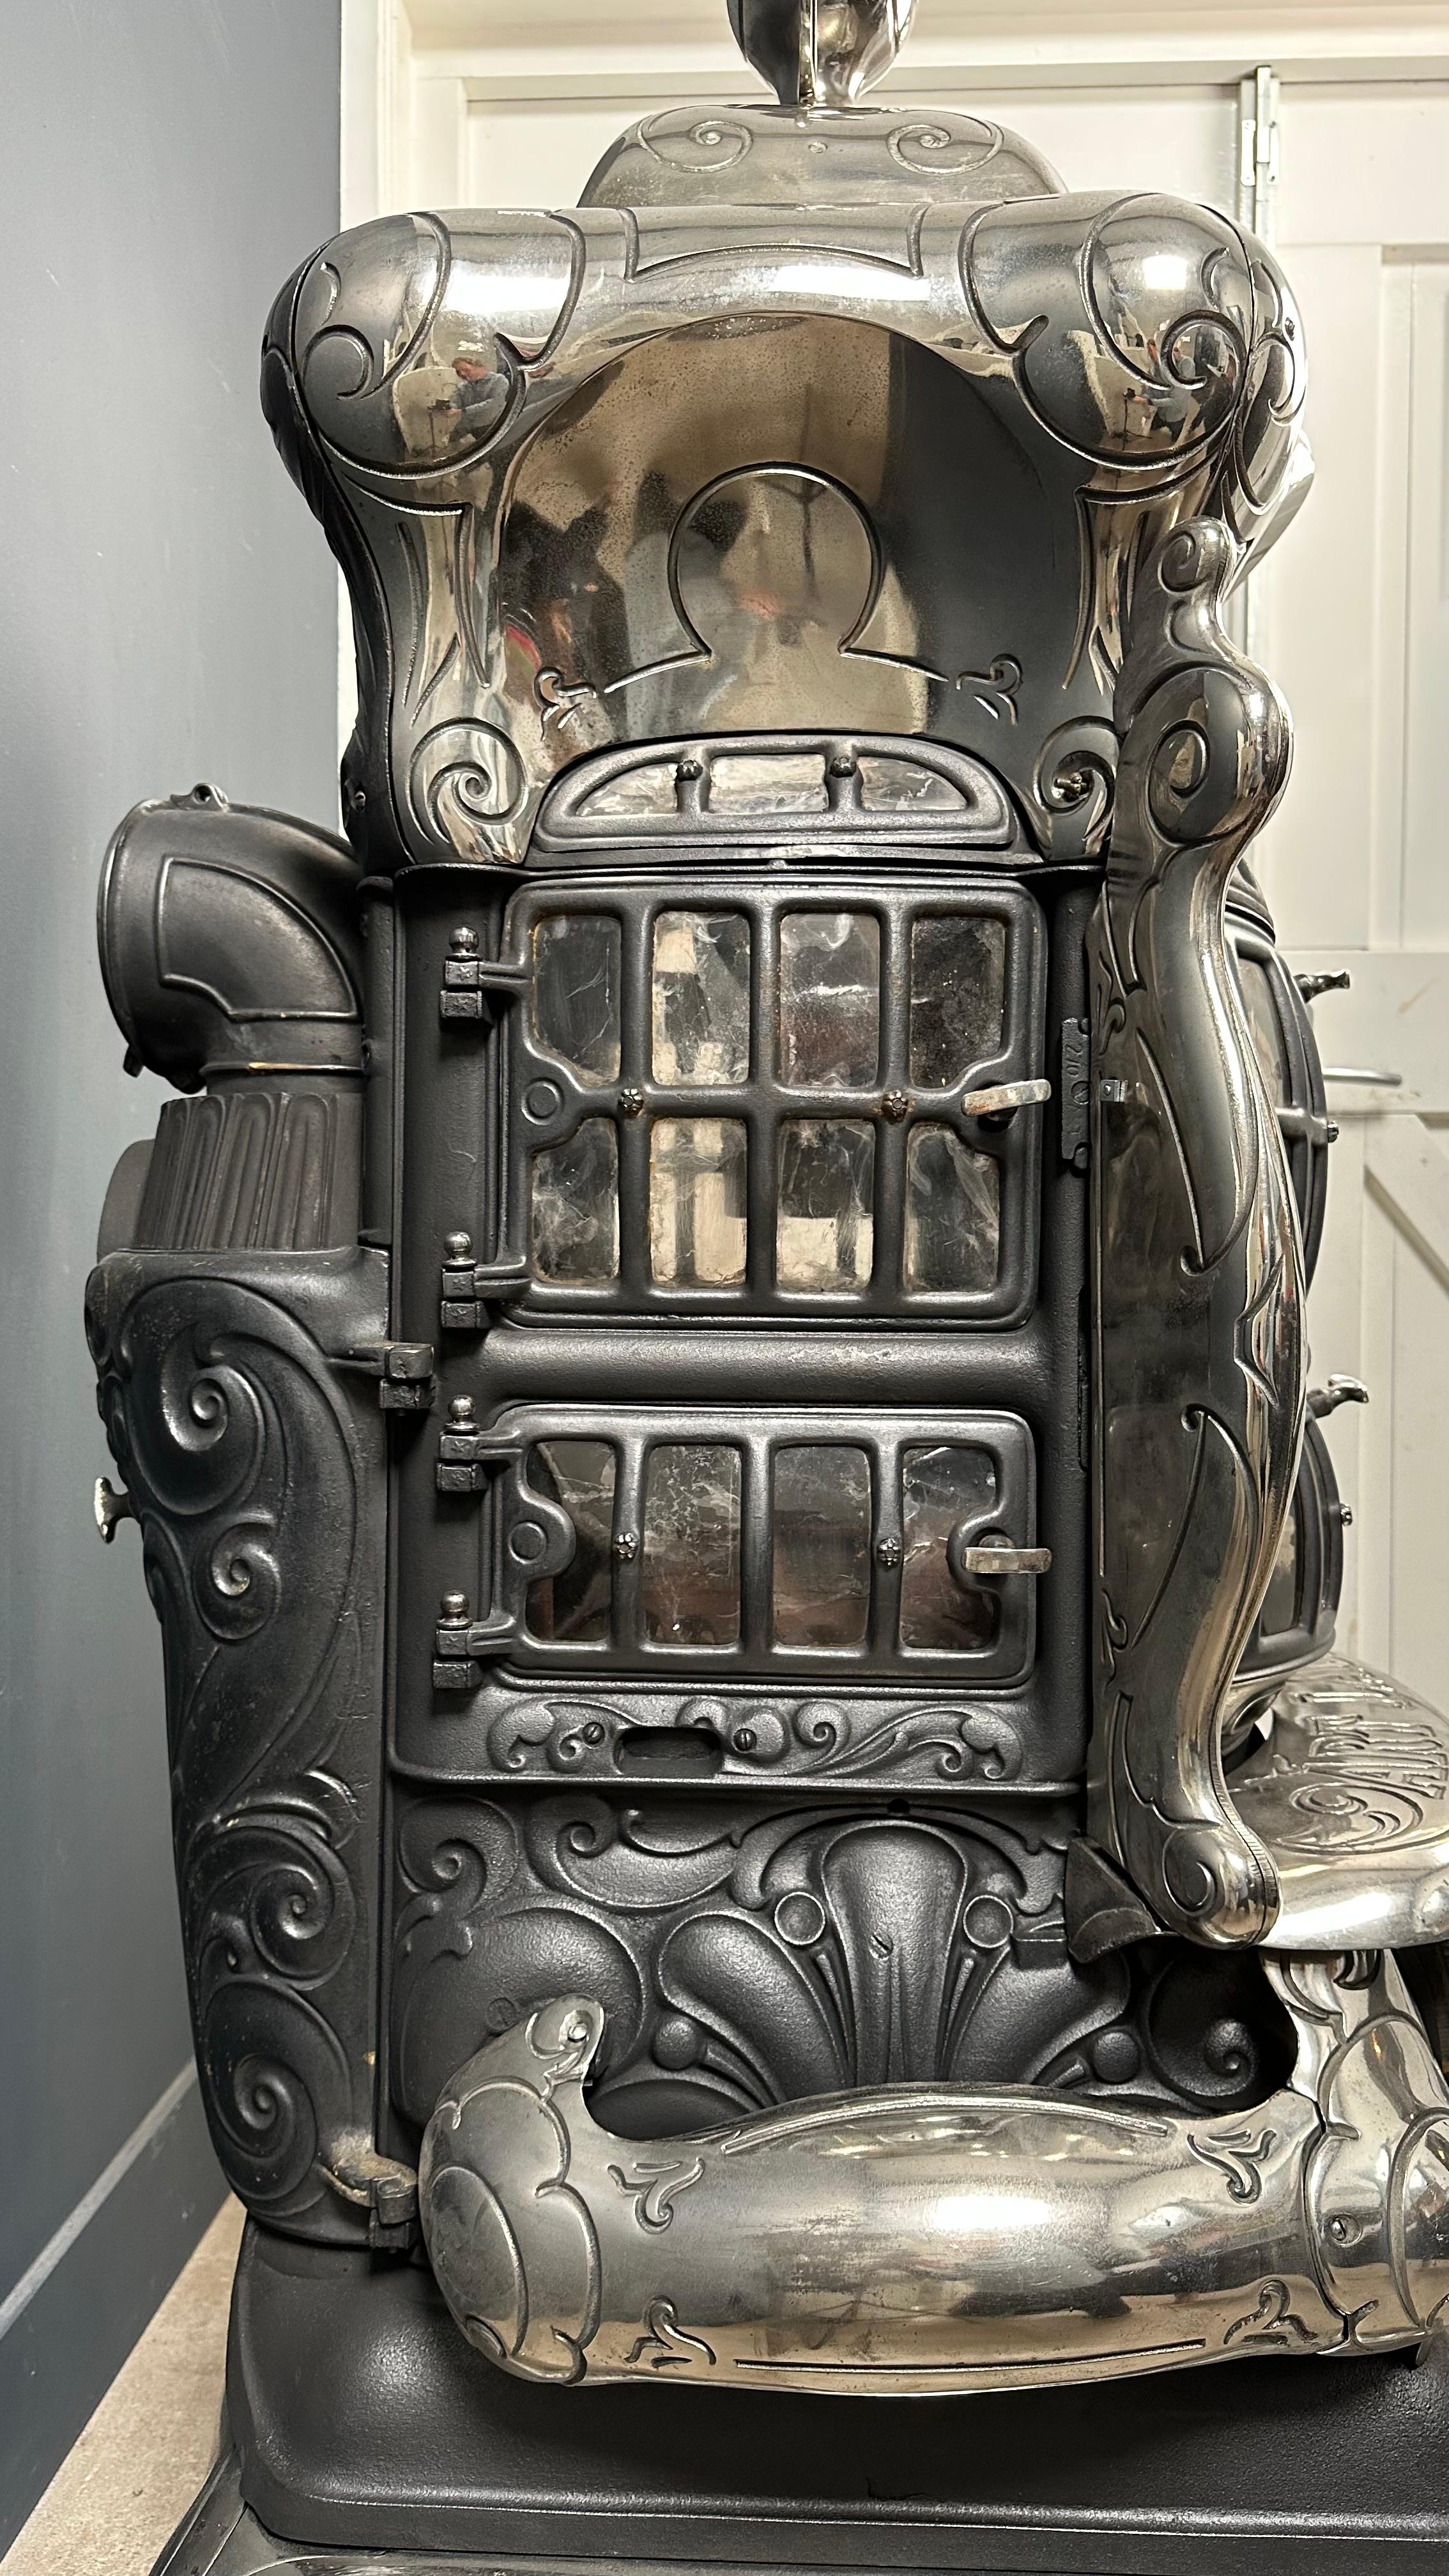 Presenting an exquisitely crafted Art Laurel wood stove, resplendent in its pristine condition. This extraordinary piece captivates the observer with its aesthetic brilliance. The intricate details woven into its design and embellishments attest to